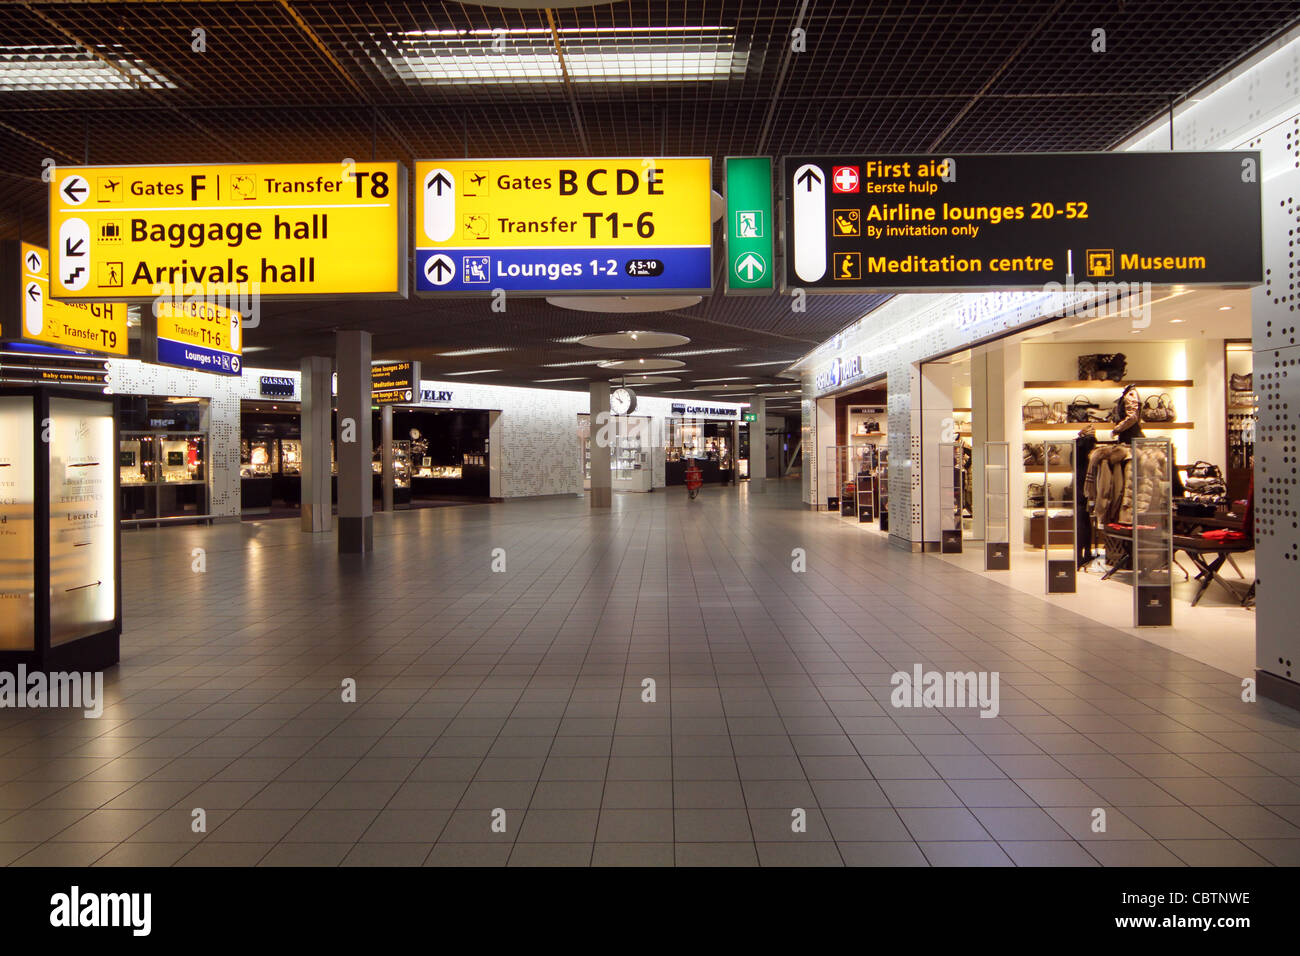 AIRPORT DIRECTION SIGNS & CONCOURSE SCHIPHOL AIRPORT AMSTERDAM HOLLAND 24 November 2011 Stock Photo